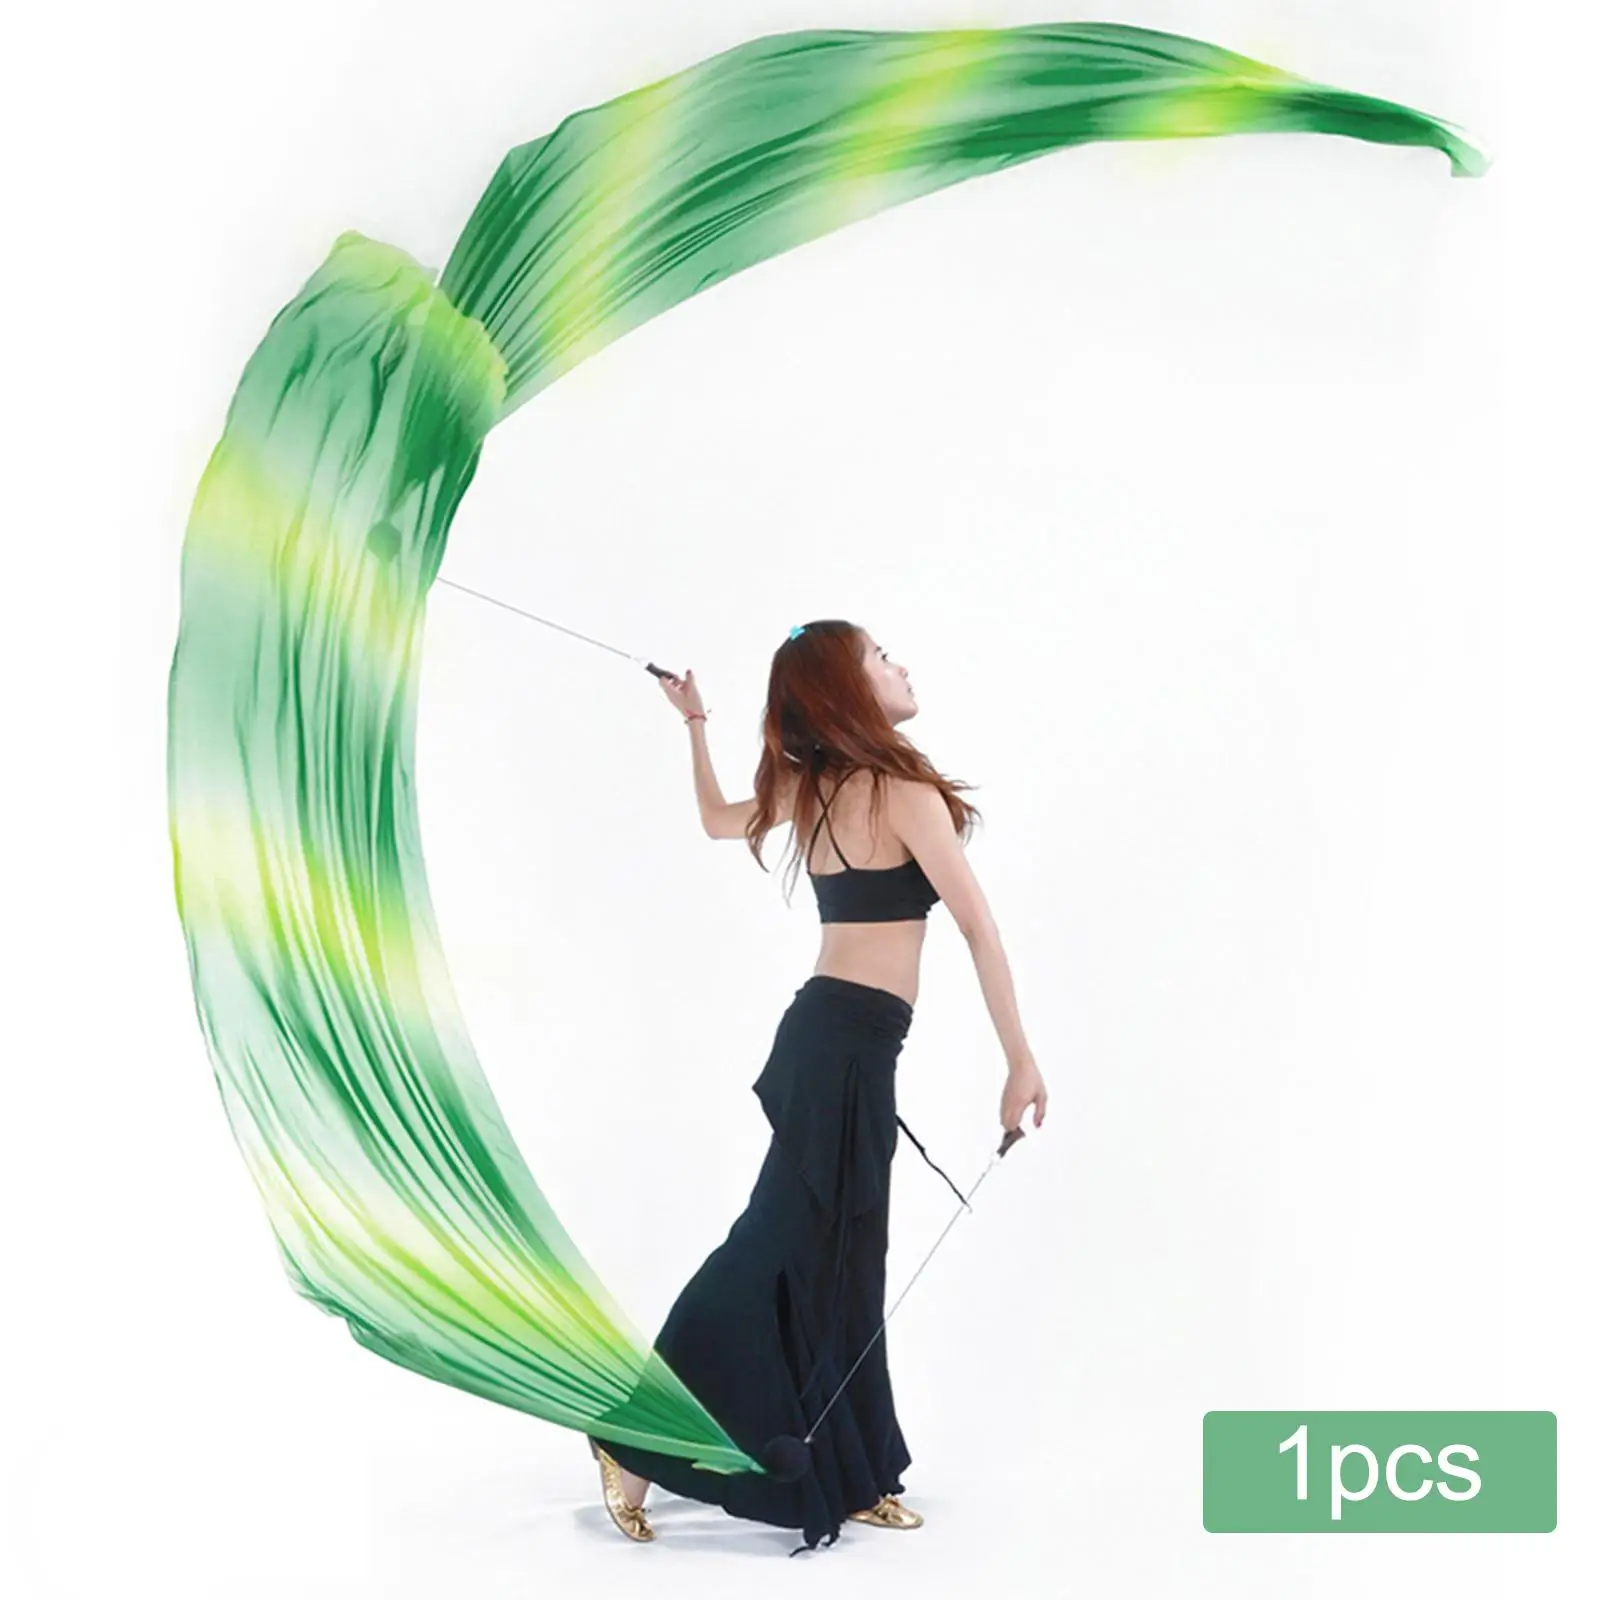 Imitated  Poi Throw Balls Belly Dance Performance Costume Props